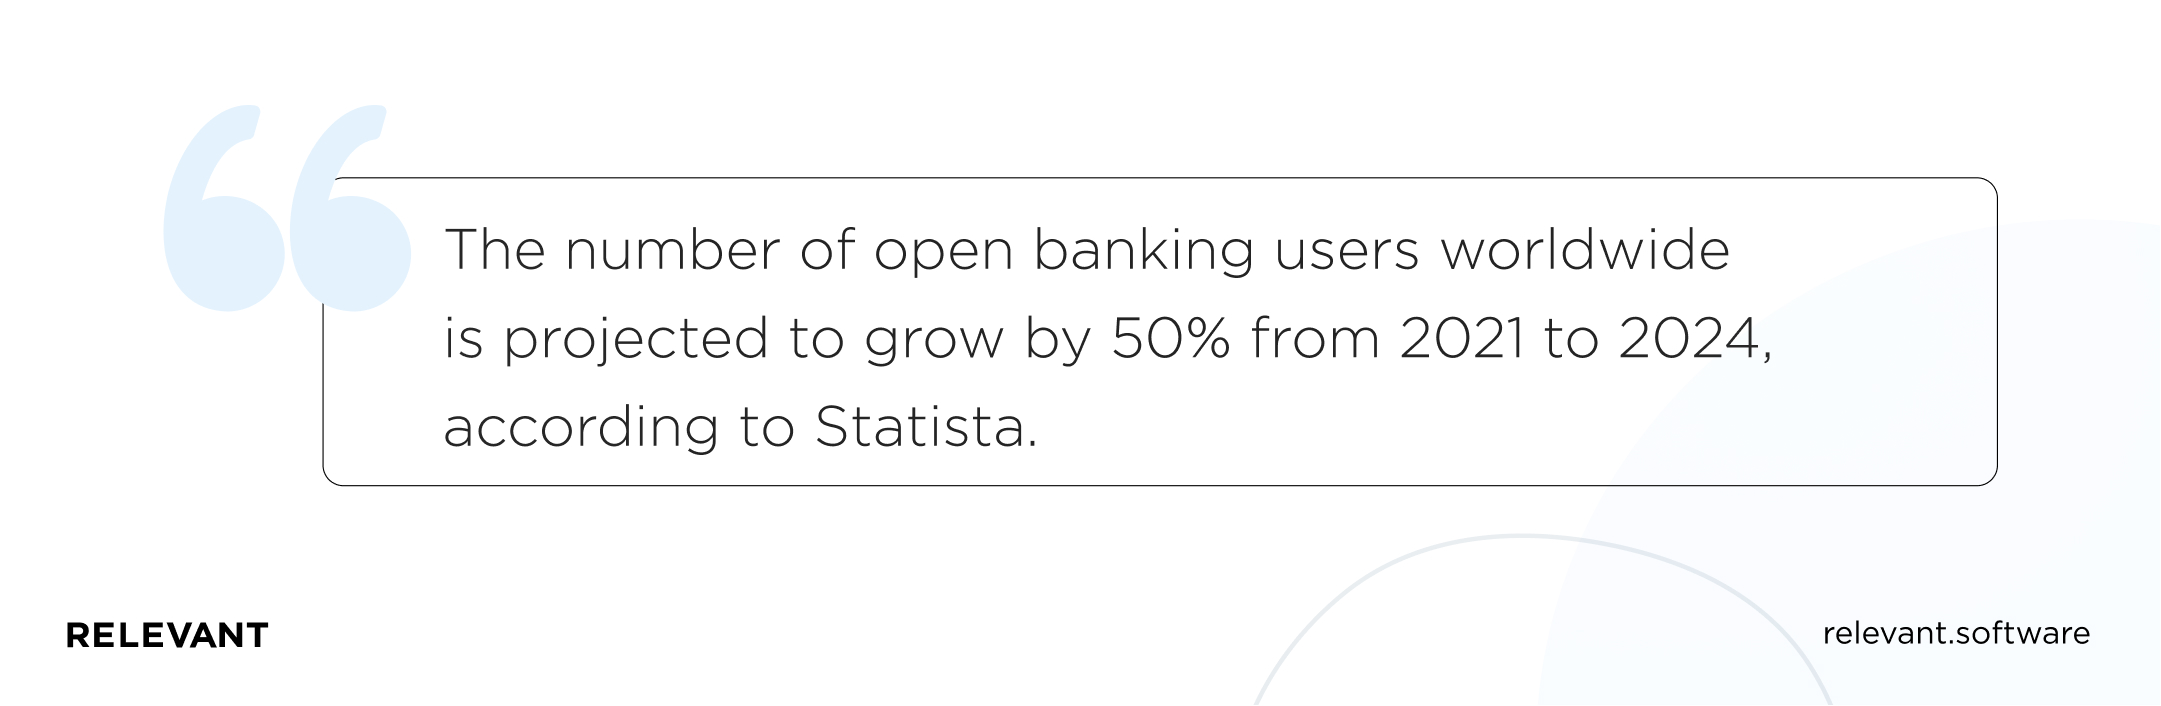 Number of open banking users worldwide in 2020 with forecasts from 2021 to 2024, by region